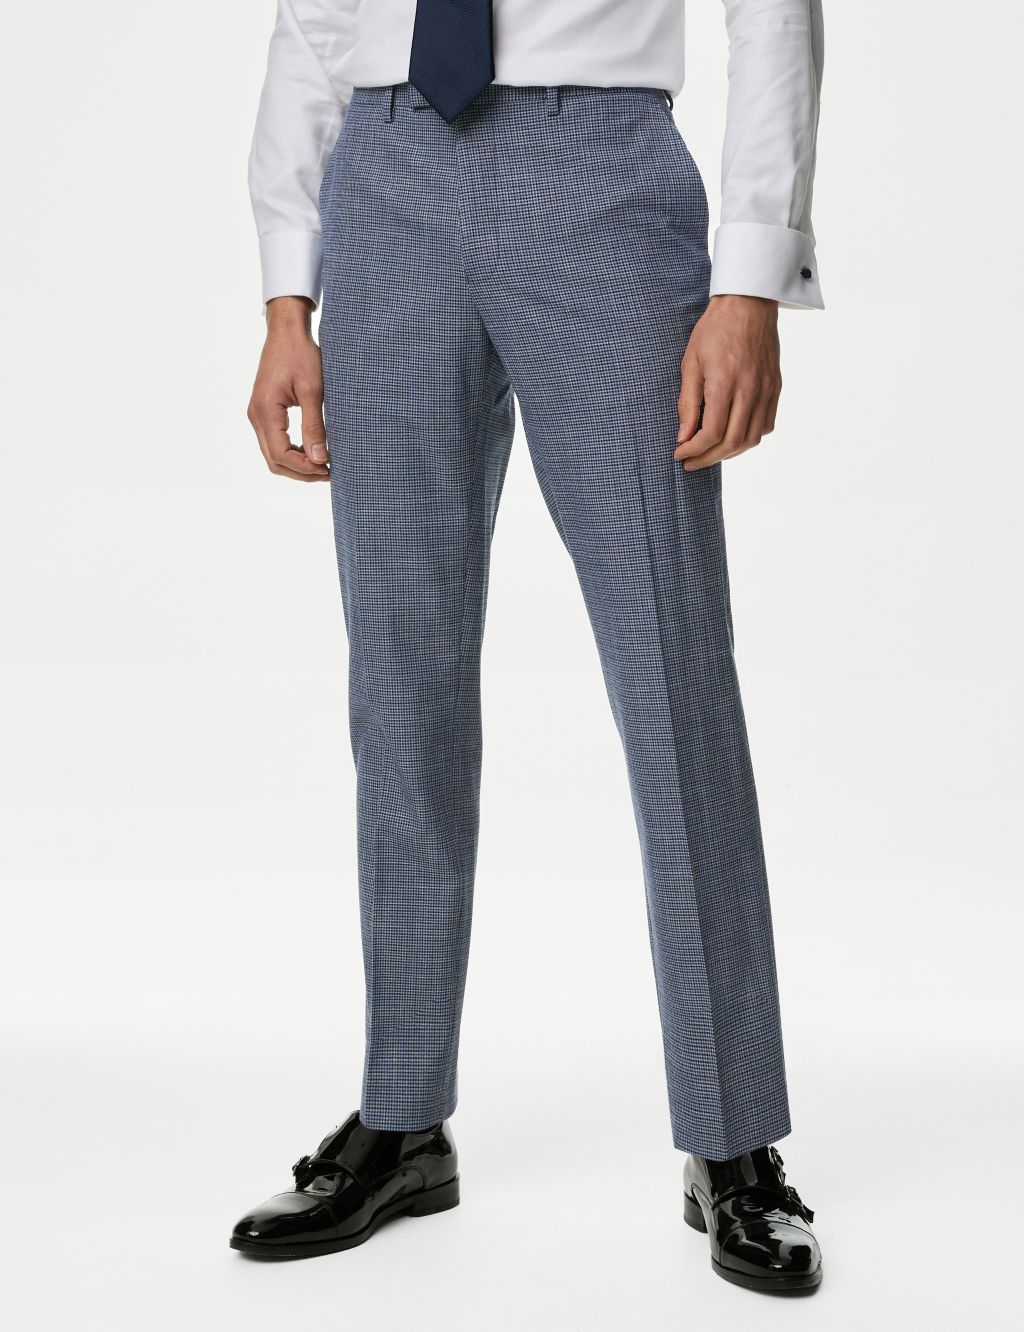 Slim Fit Puppytooth Stretch Suit Trousers | M&S Collection | M&S